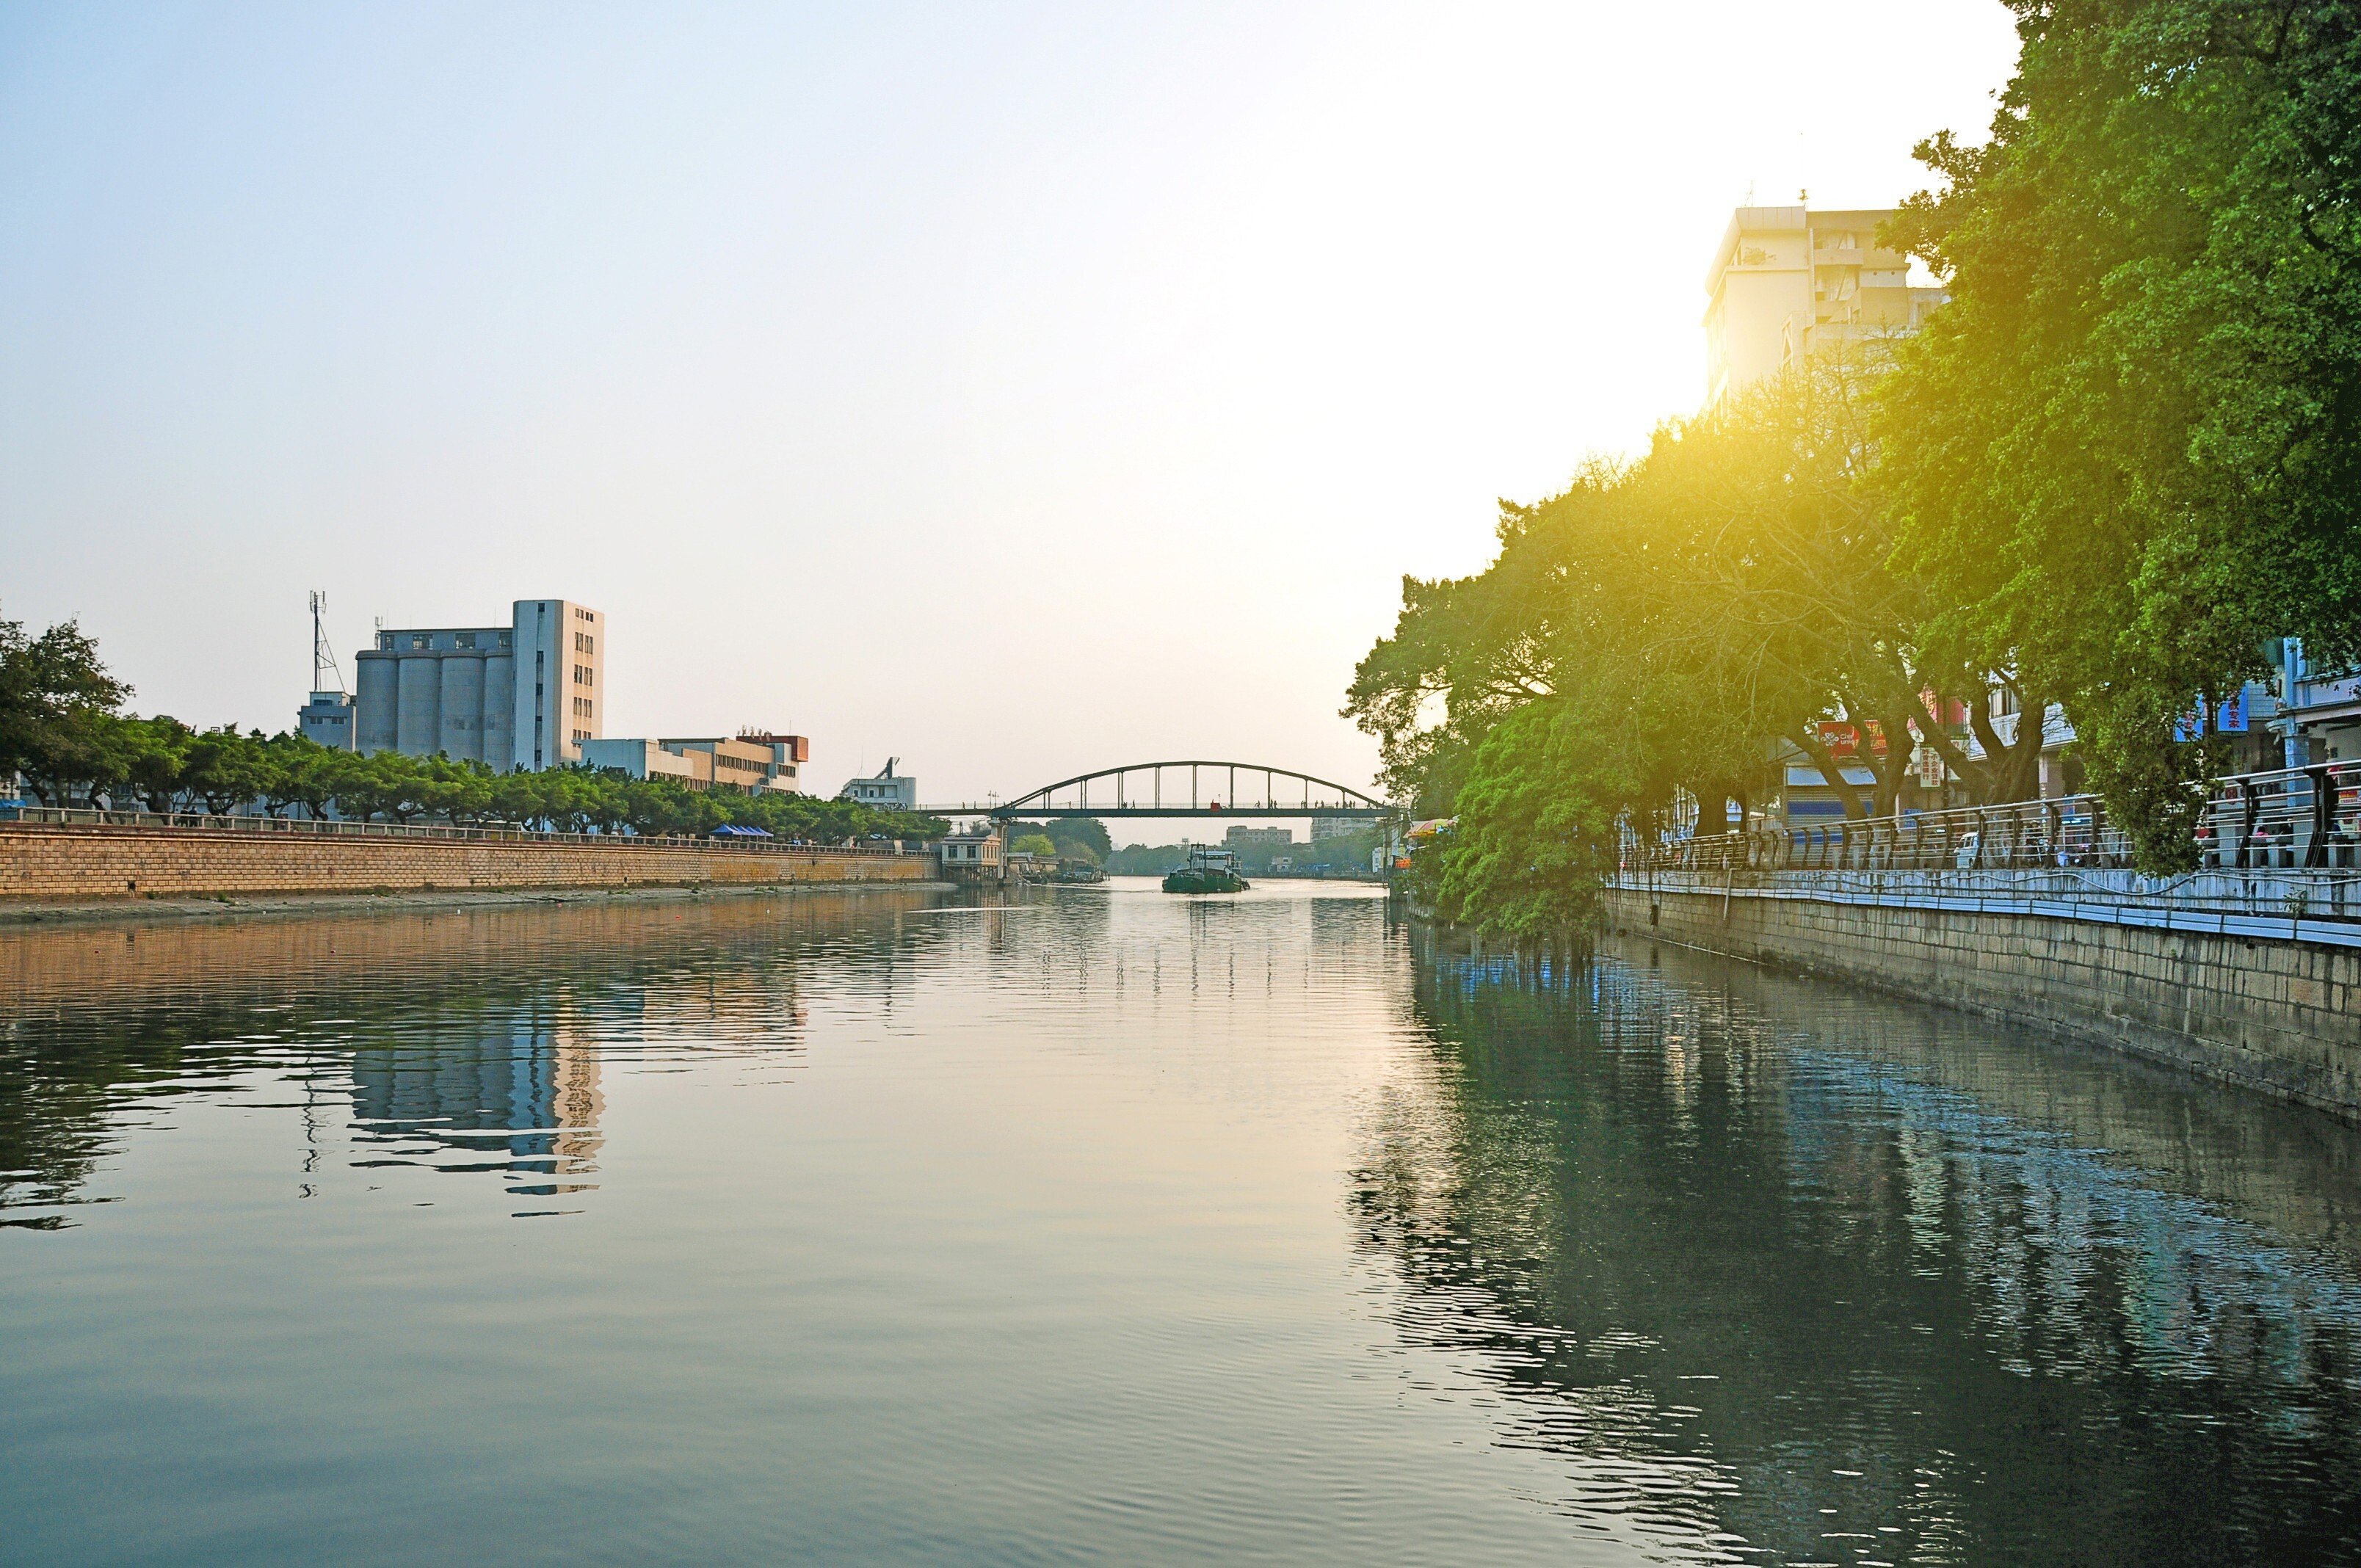 There is confidence in Jiangmen’s potential because of continued optimism around the Greater Bay Area development plan, according to a developer. Photo: Shutterstock